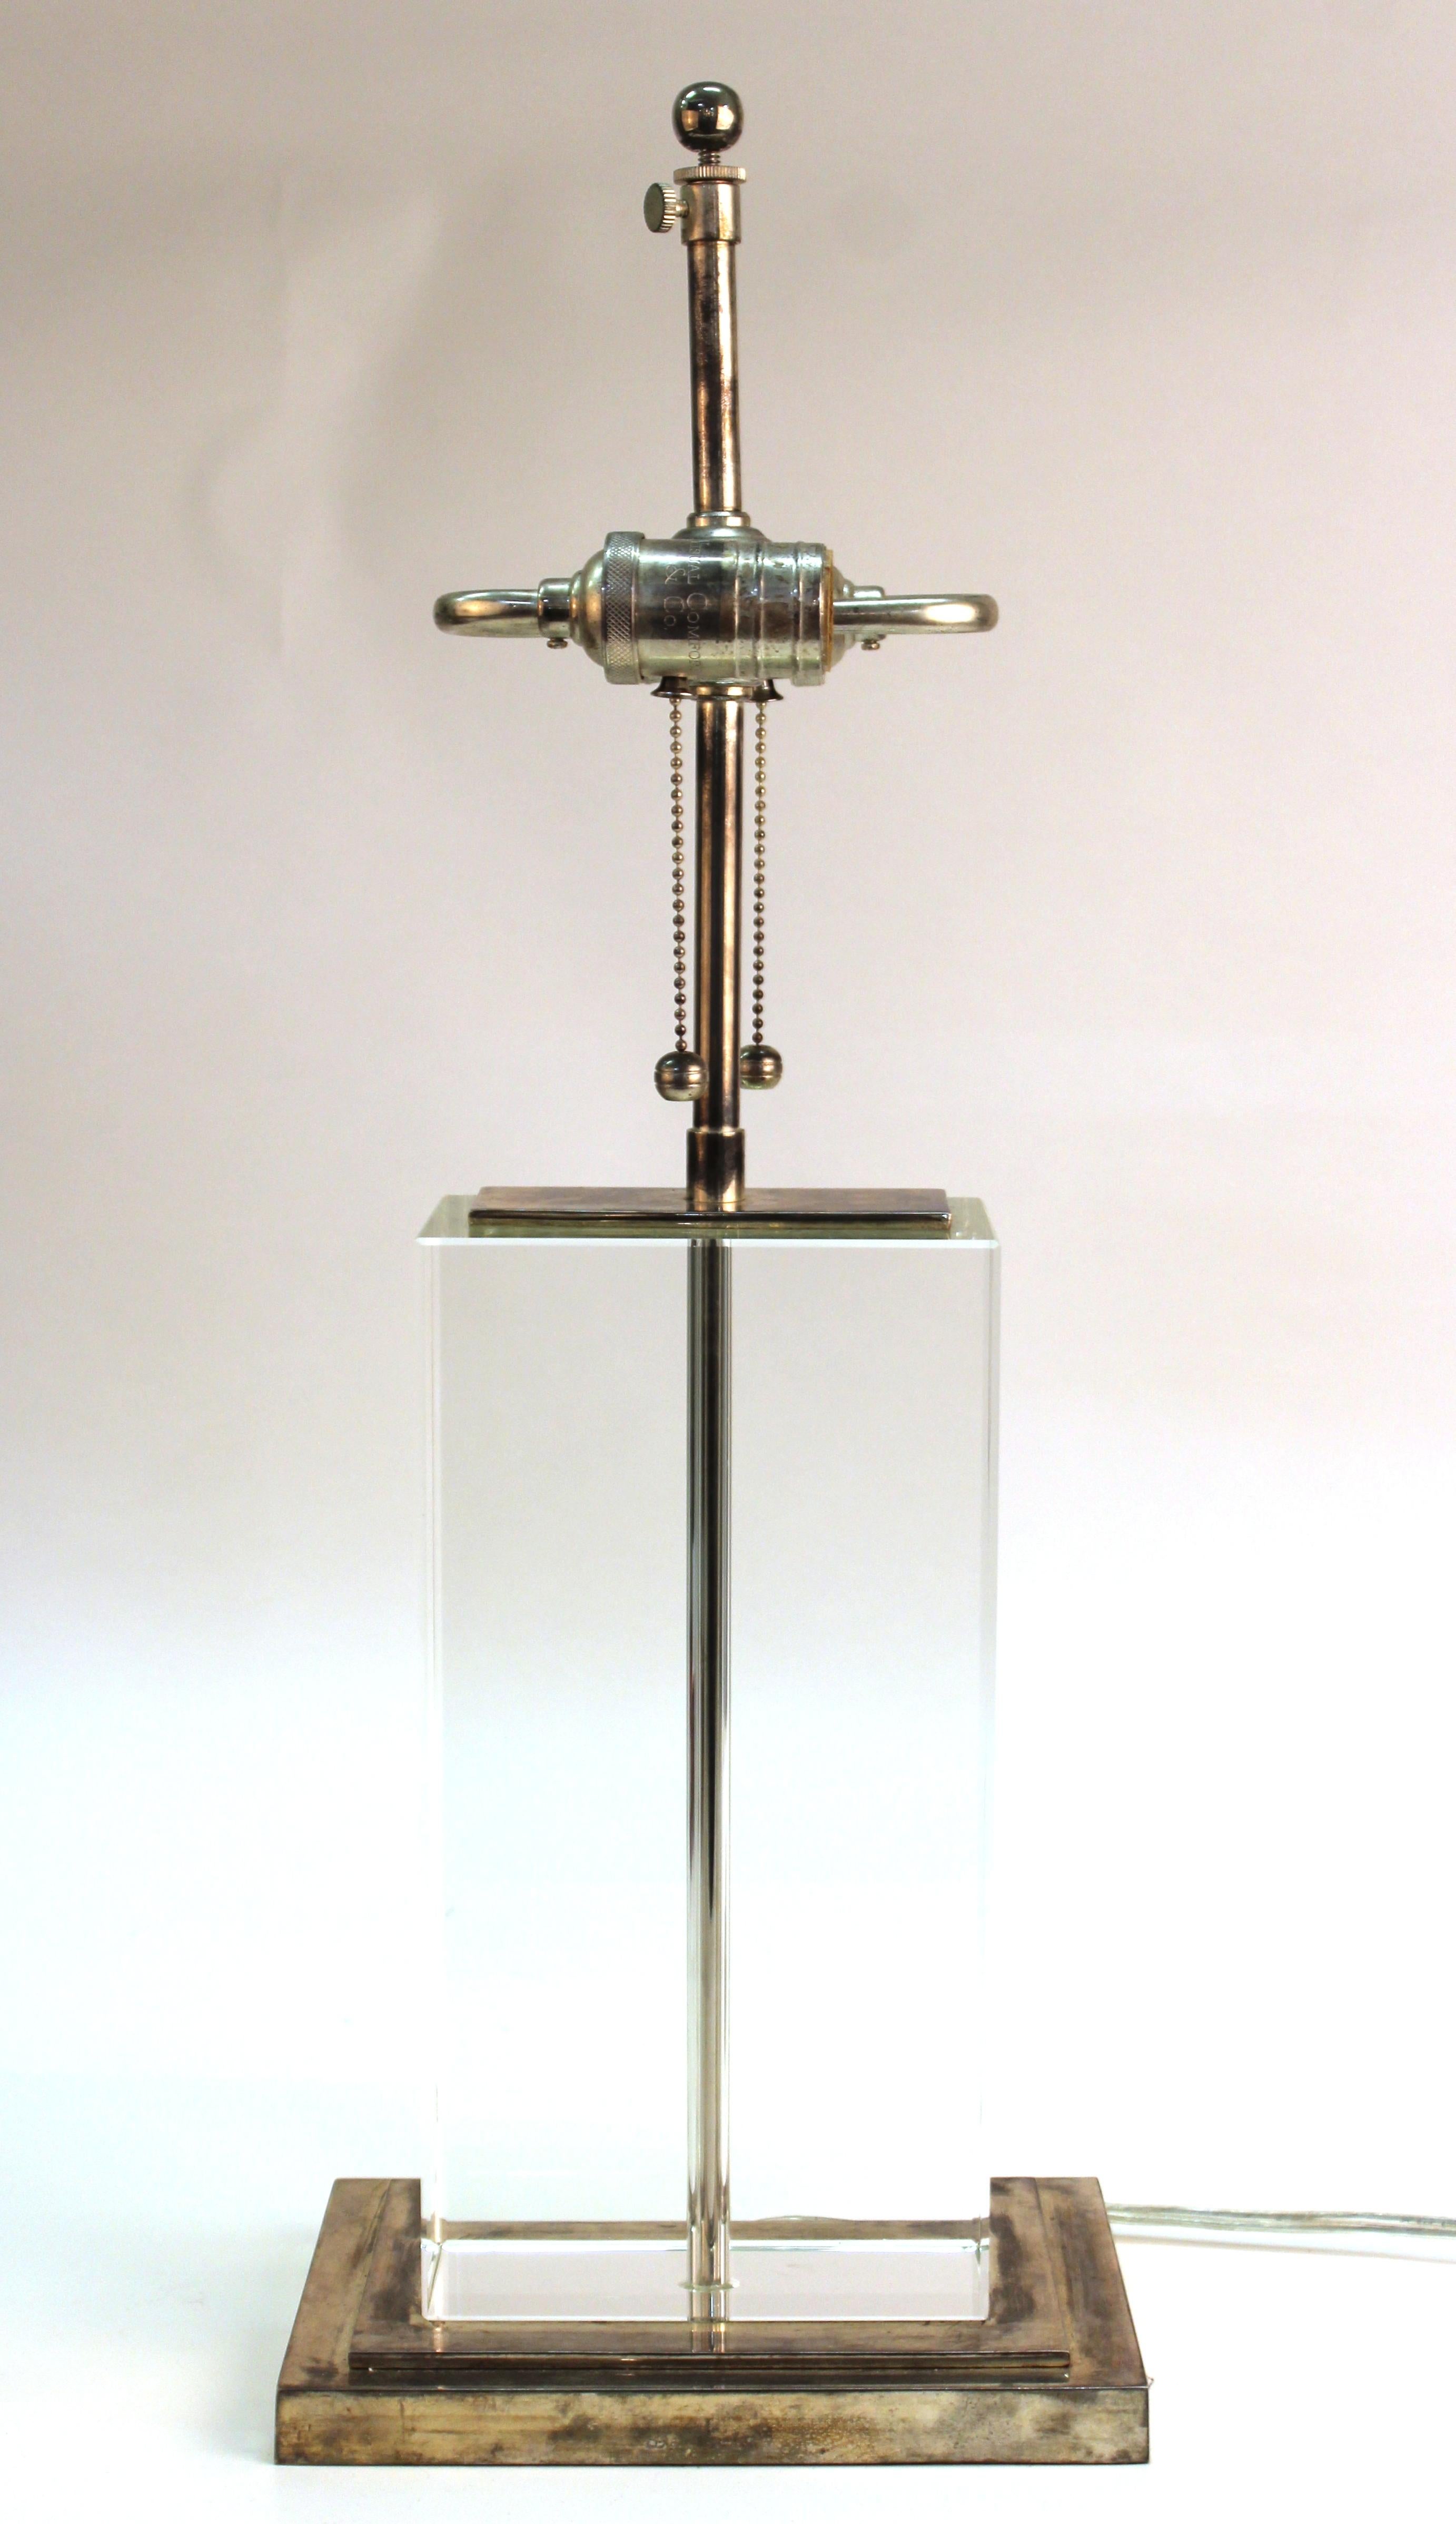 Modern table lamp composed of a heavy block of clear glass and chromed metal base and top. The piece has two light sockets and is in great vintage condition with age-appropriate wear and use.